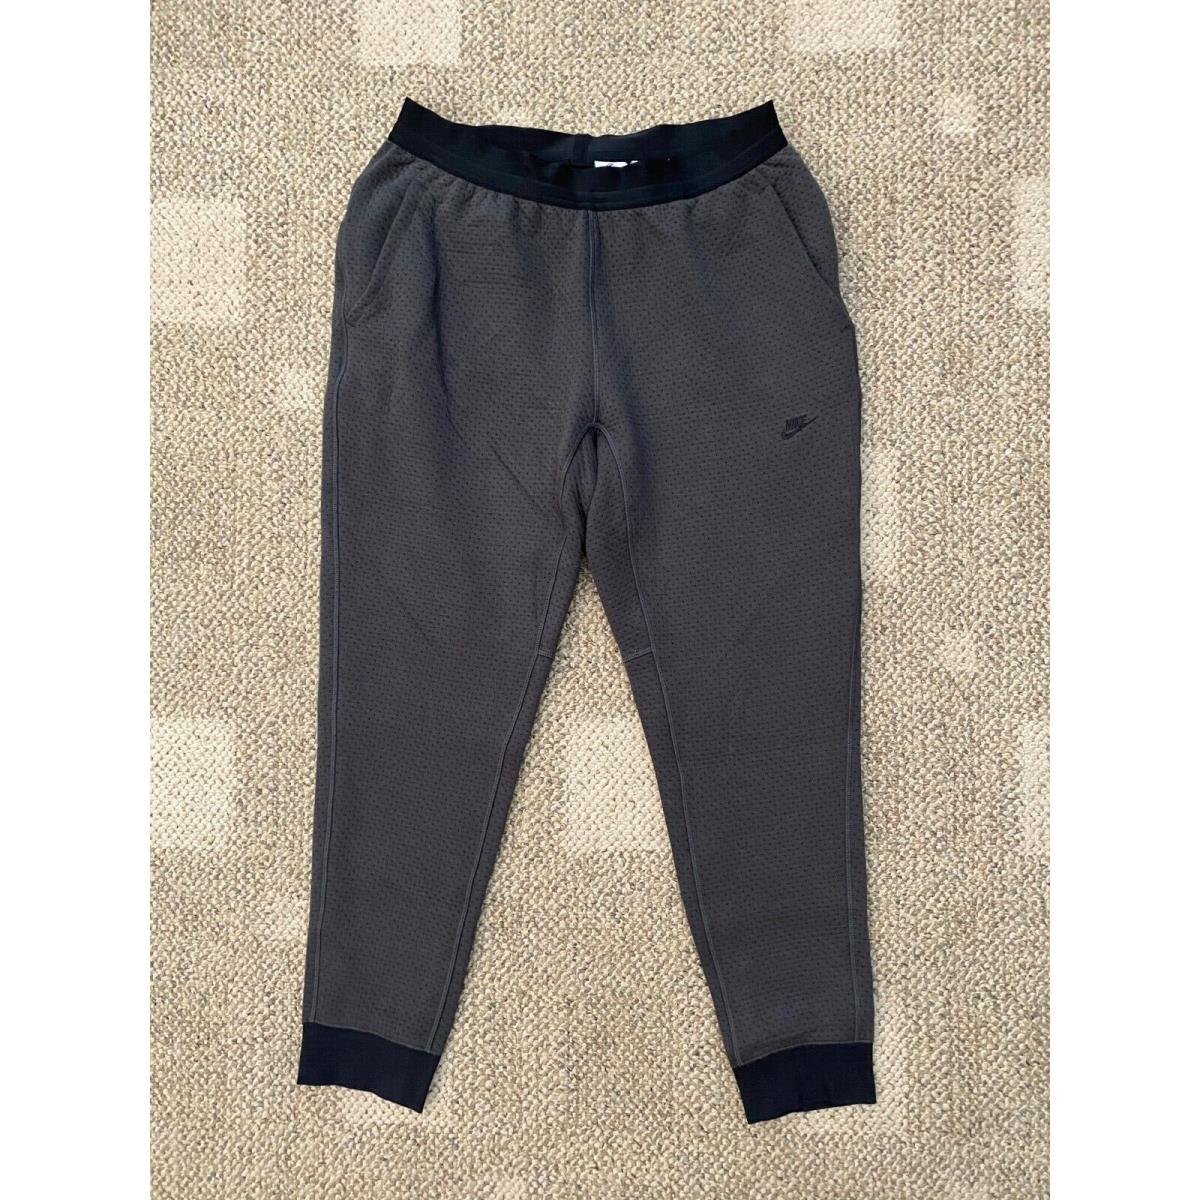 Men`s Xxl Nike Therma-fit Adv Tech Pack Jogger Engineered Gray Pants DD6625